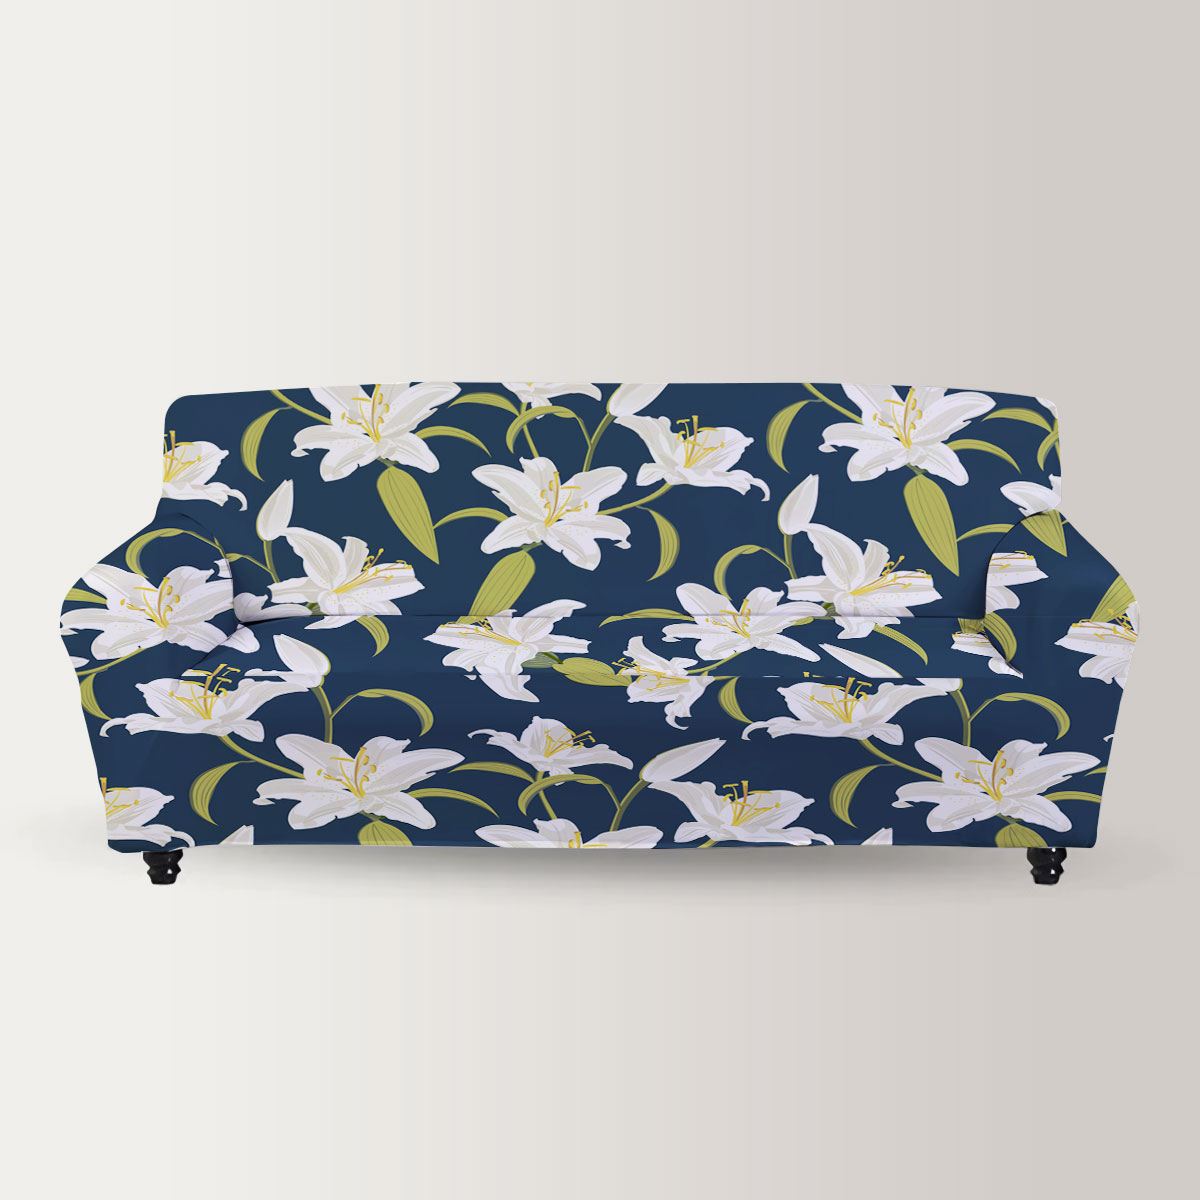 Lily Seamless Pattern On Blue Background Sofa Cover